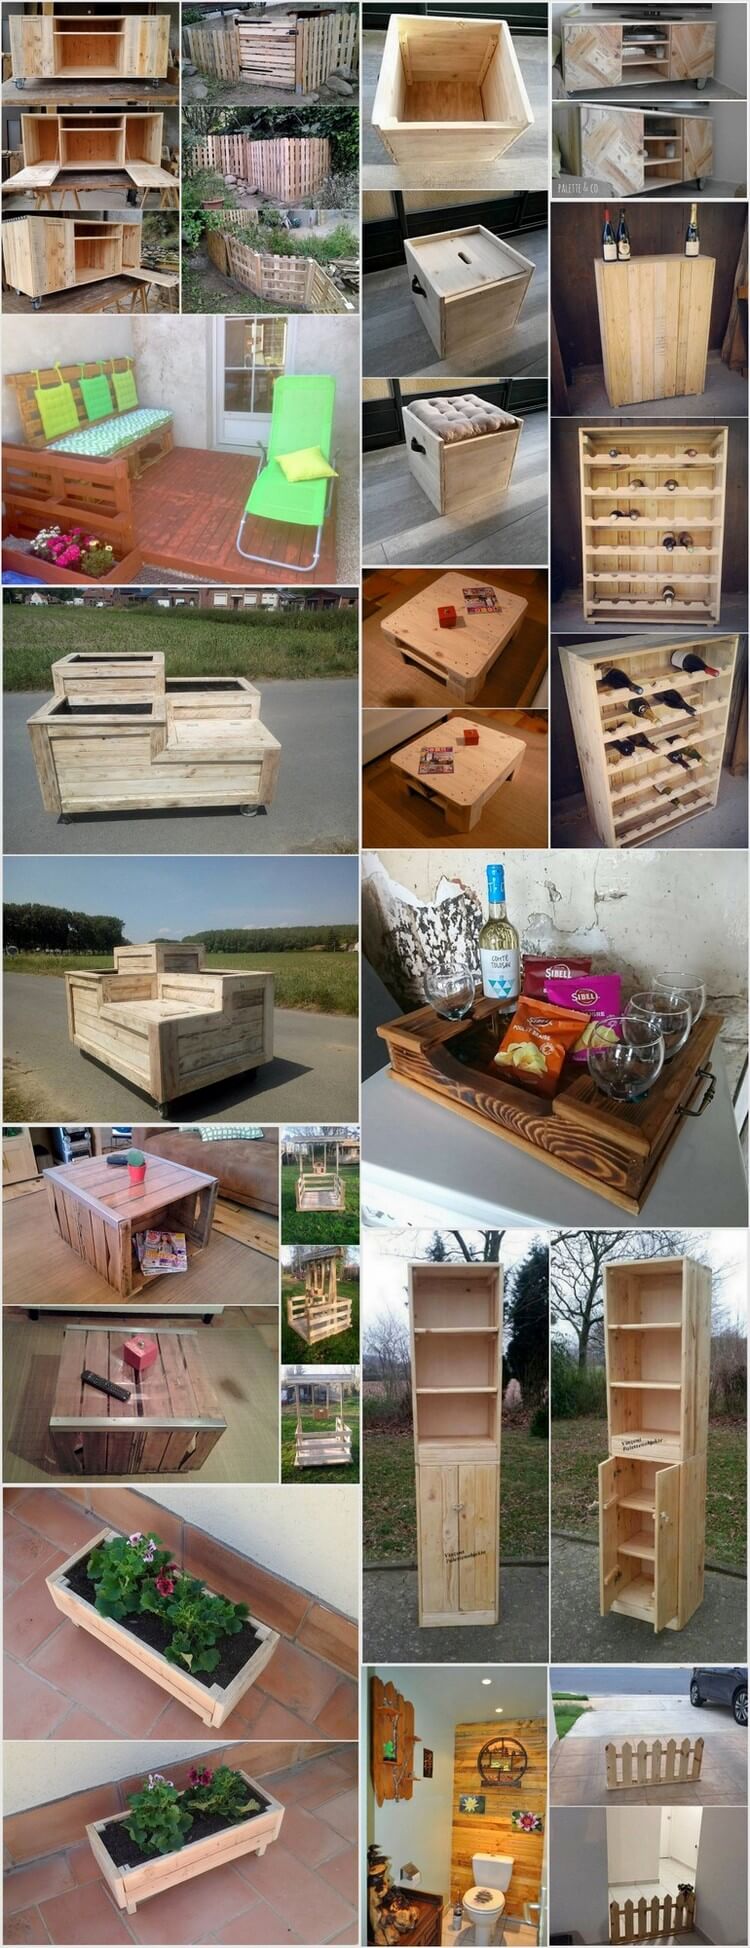 Amazing Uses for Old Wooden Pallets